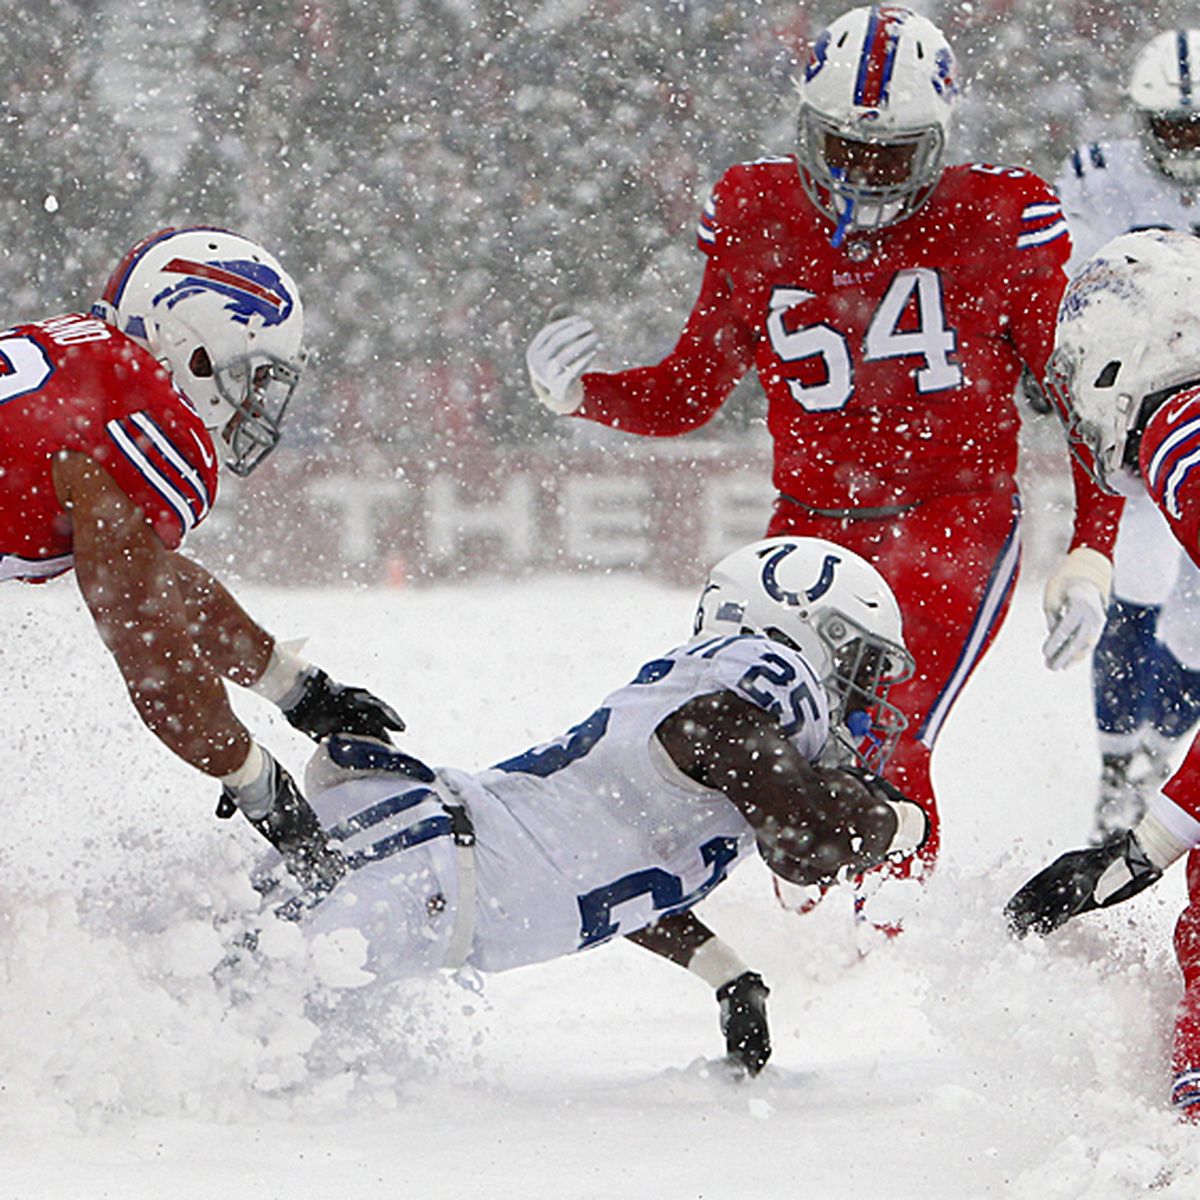 NFL: Buffalo Bills and Colts in snowstorm